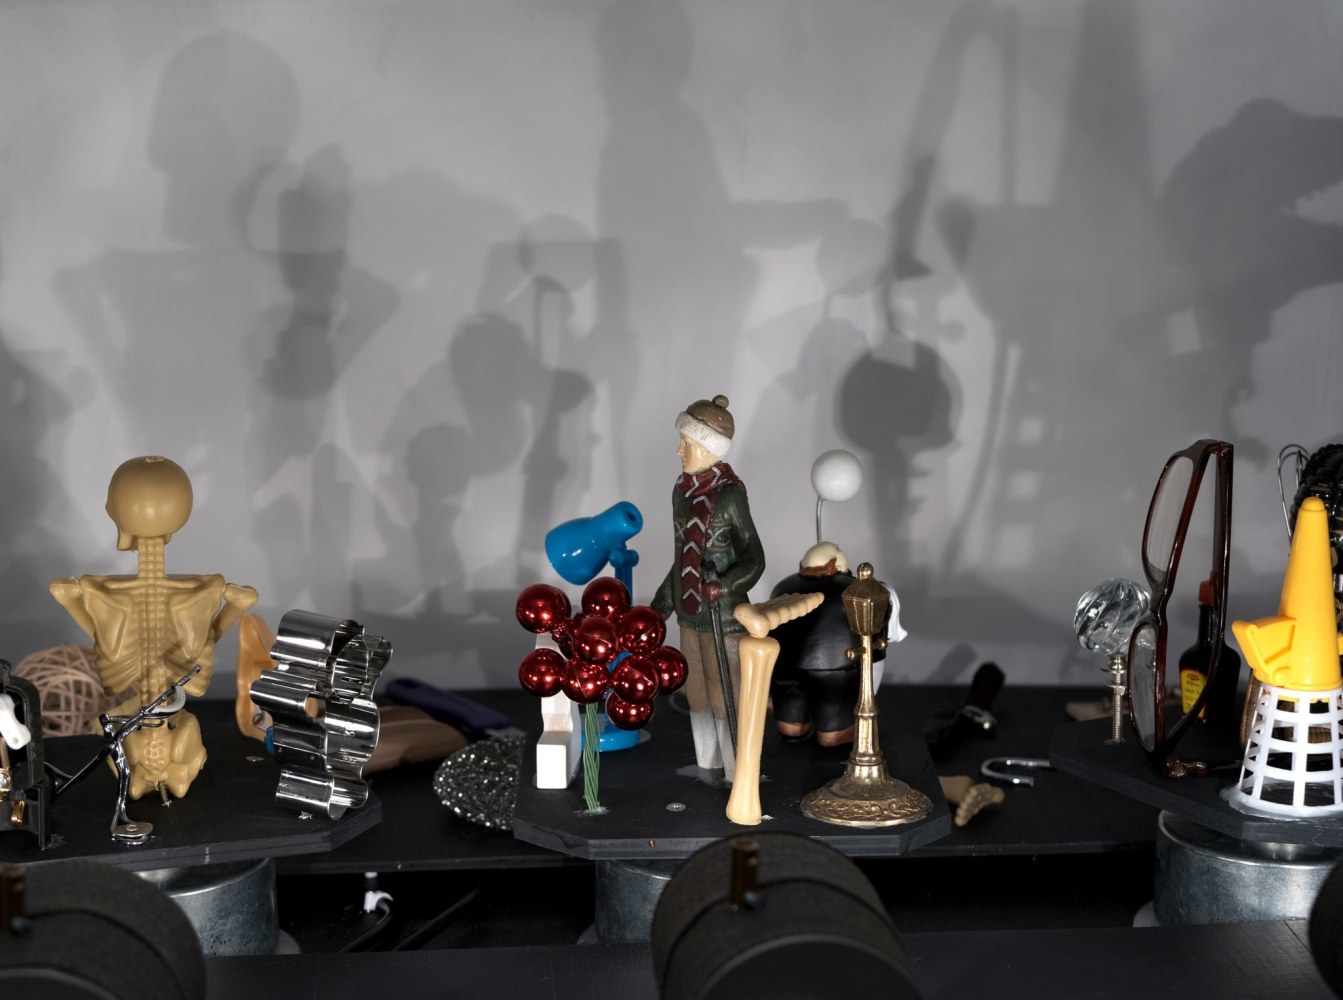 Hans-Peter Feldmann

Pocket Shadow Play

4 mechanical rotating discs on wood desk, lamps, various objects

52 1/2 x 40 1/2 x 32 inches (133 x 102.5 x 81.5 cm)

HPF 444

&amp;nbsp;

INQUIRE